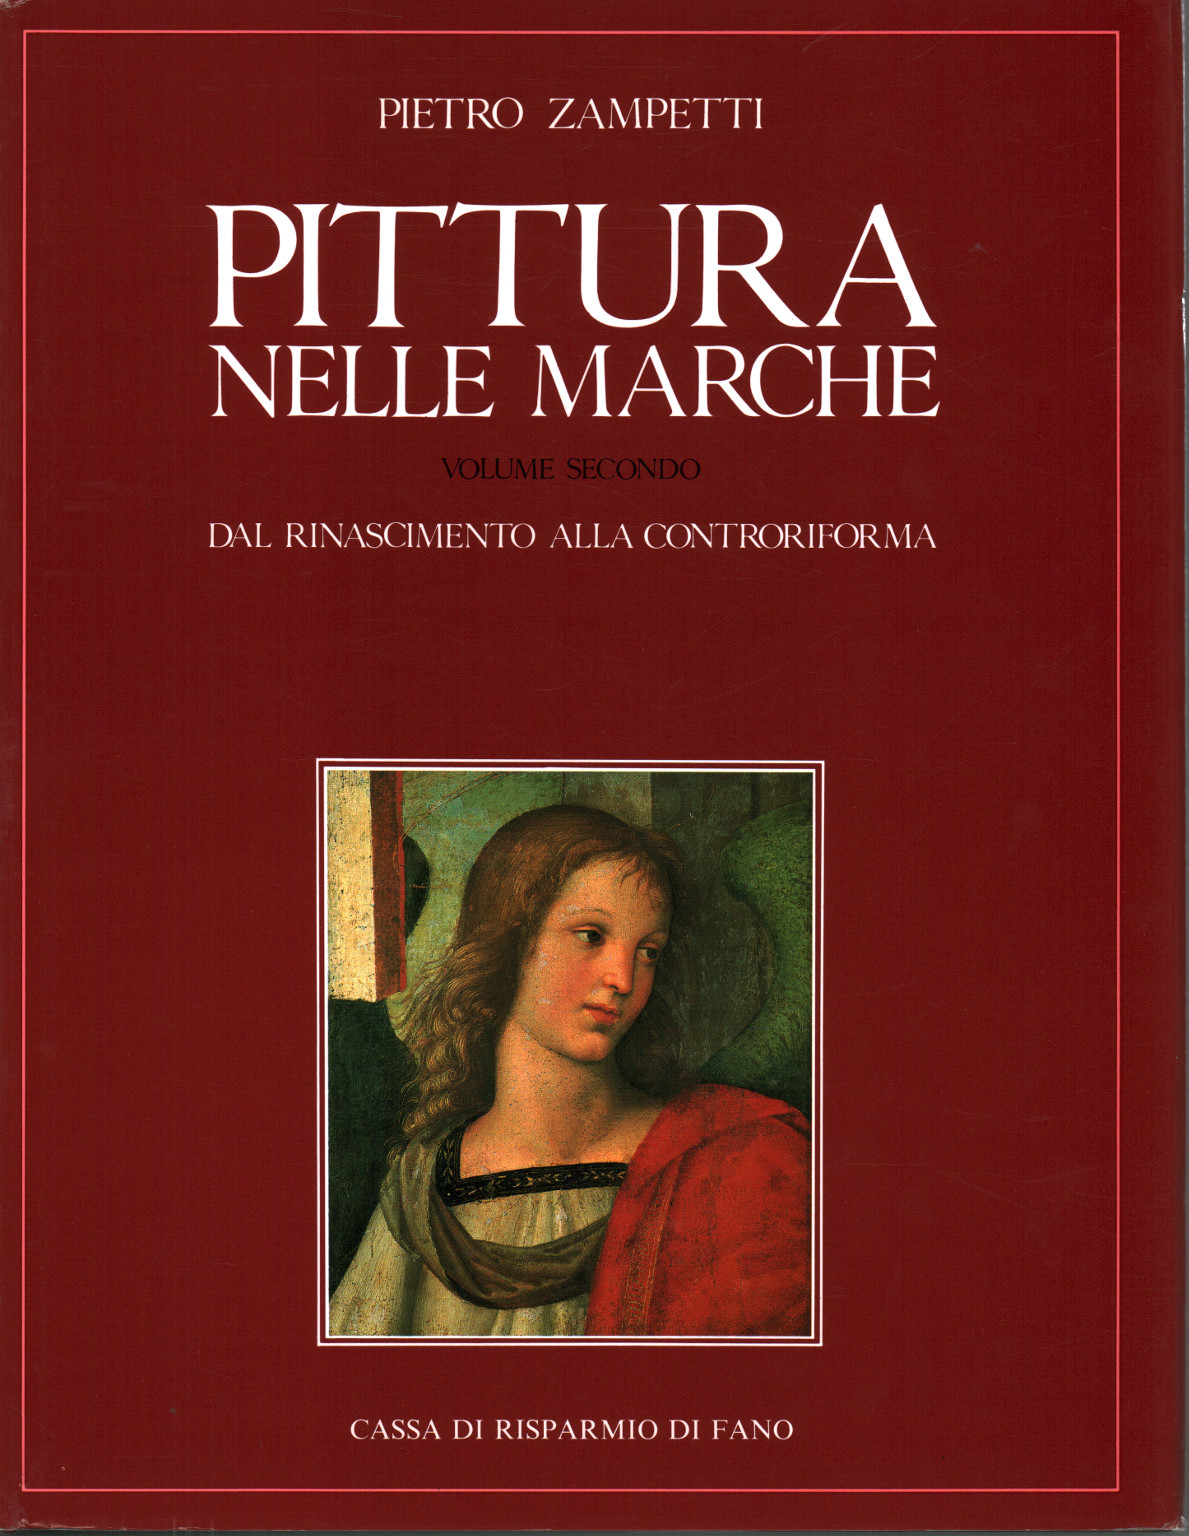 Painting in the Marche region. Vol II: From the Renaissance to, s.a.